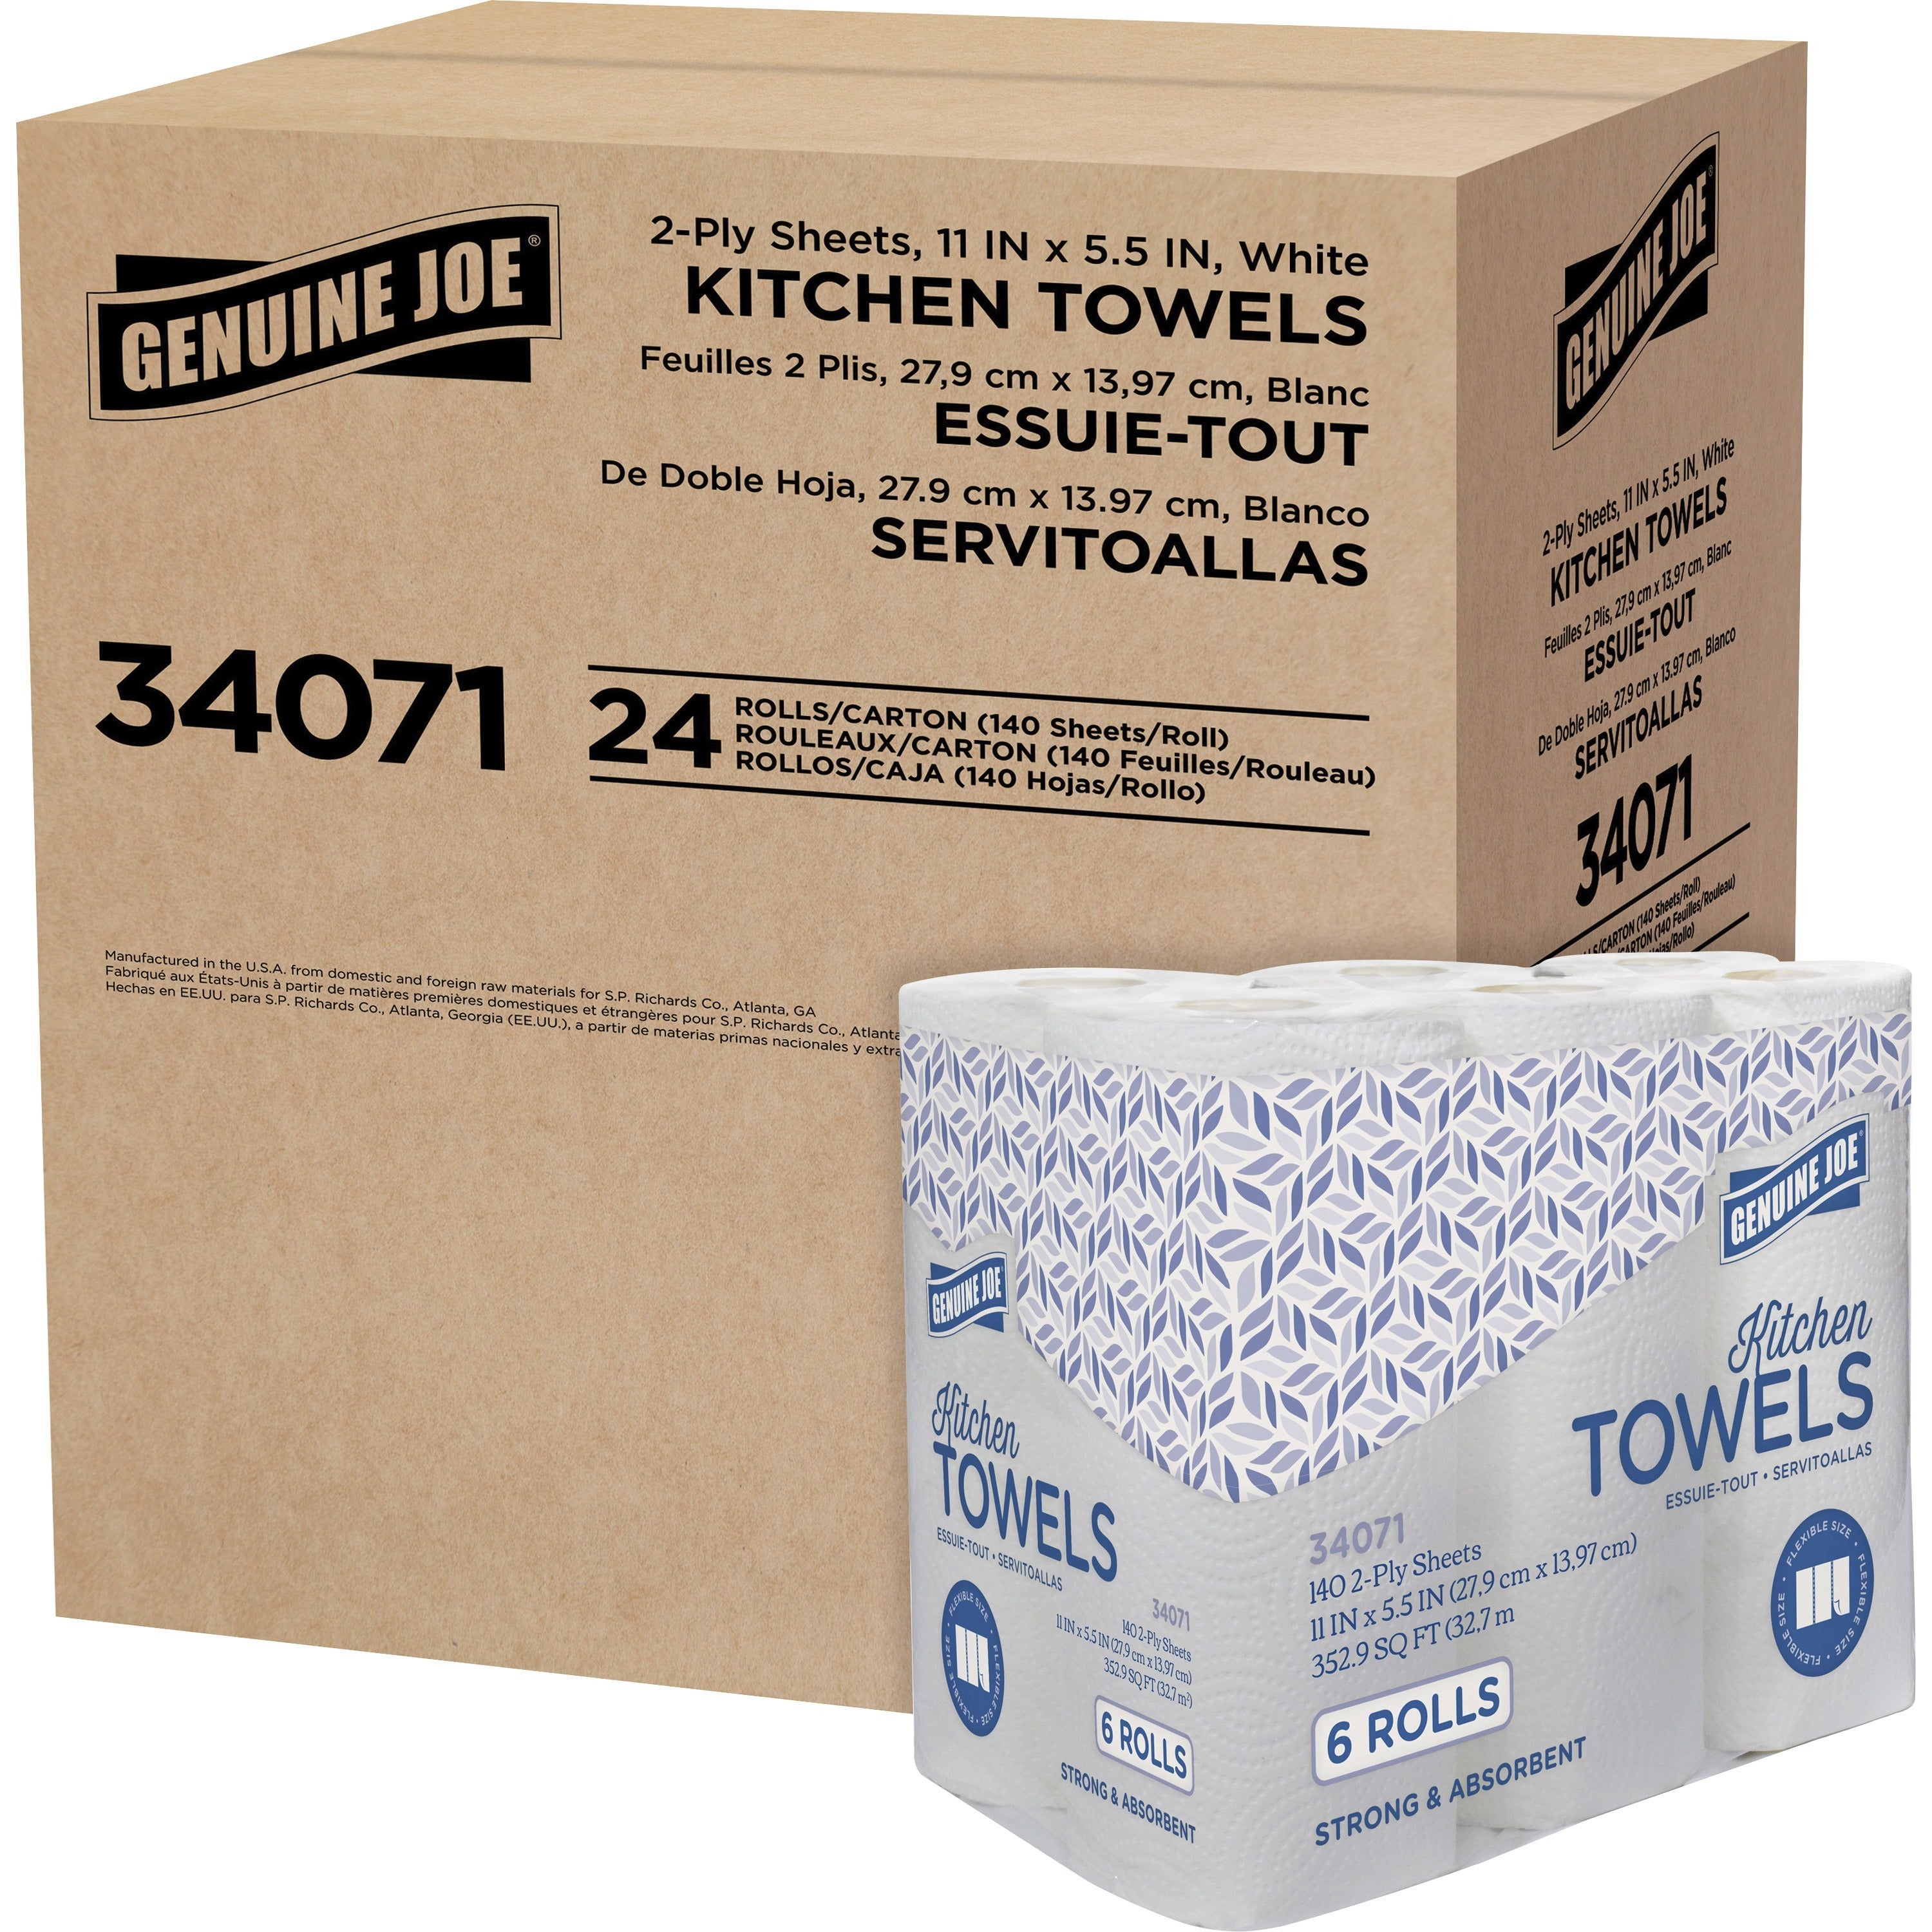 genuine-joe-kitchen-paper-towels-2-ply-140-sheets-roll-white-perforated-soft-absorbent-for-kitchen-breakroom-hand-6-rolls-per-container-4-carton_gjo34071 - 1